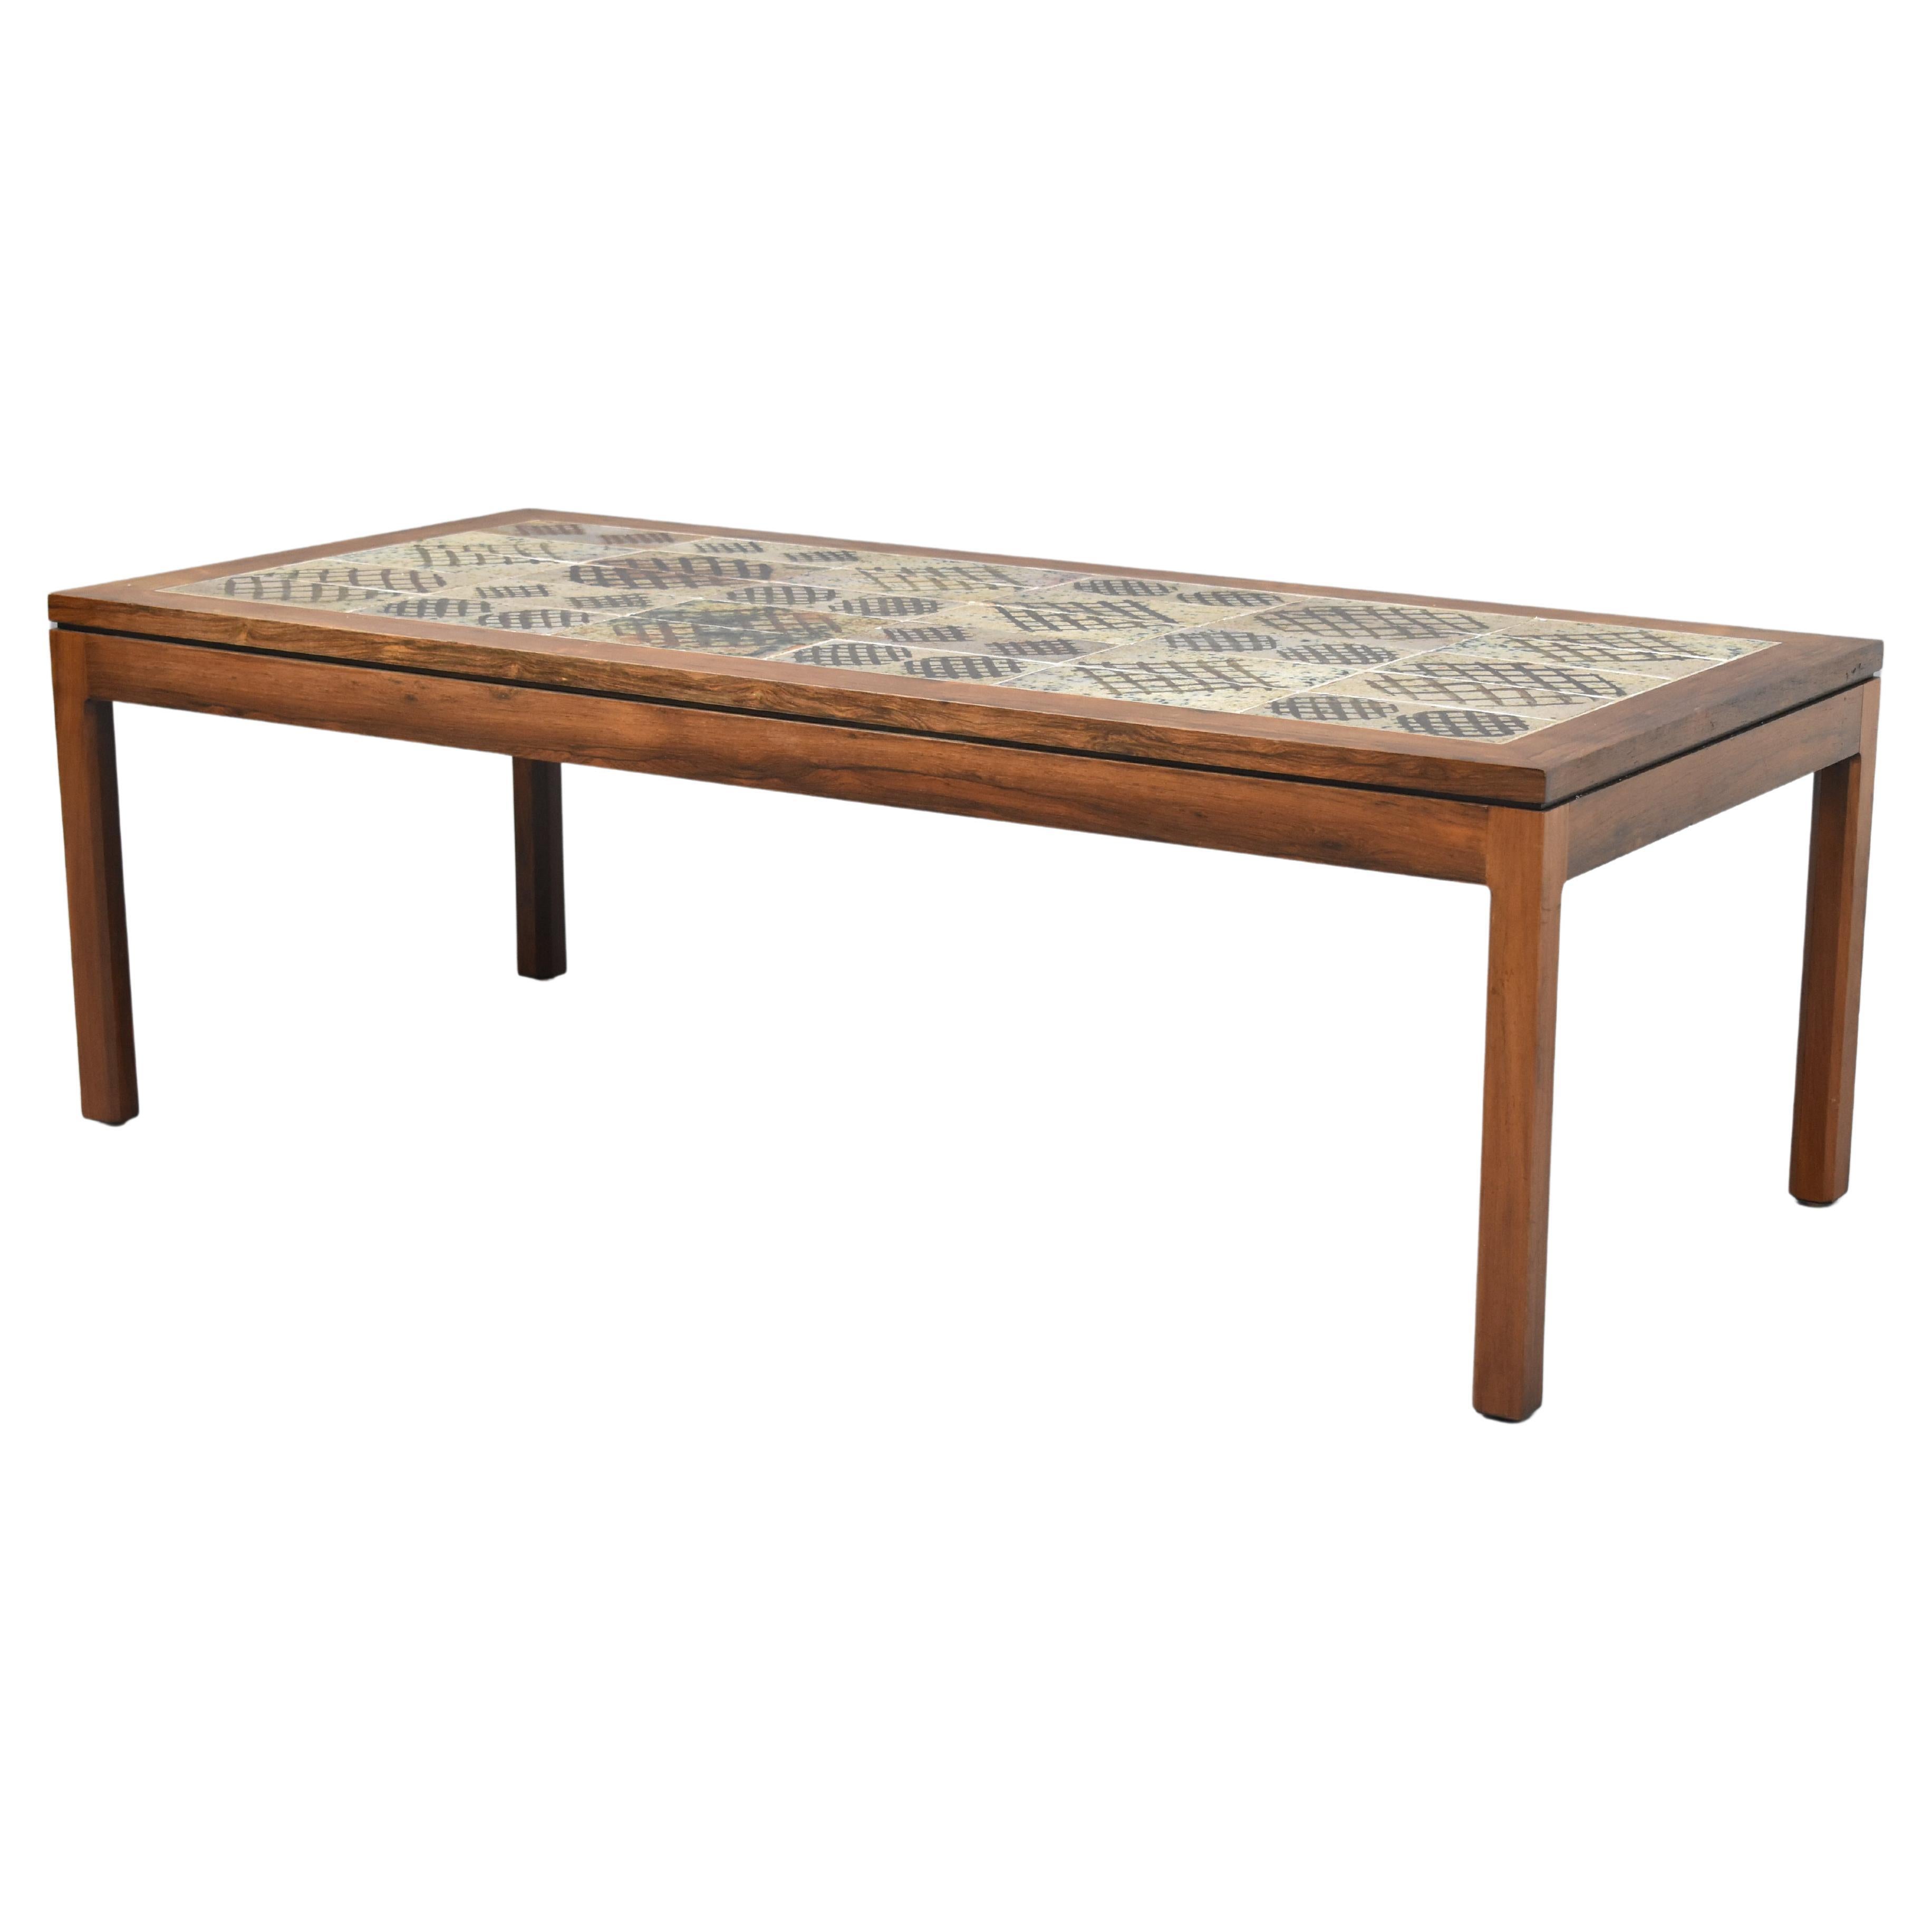 Vintage Rosewood and Tile Coffee Table